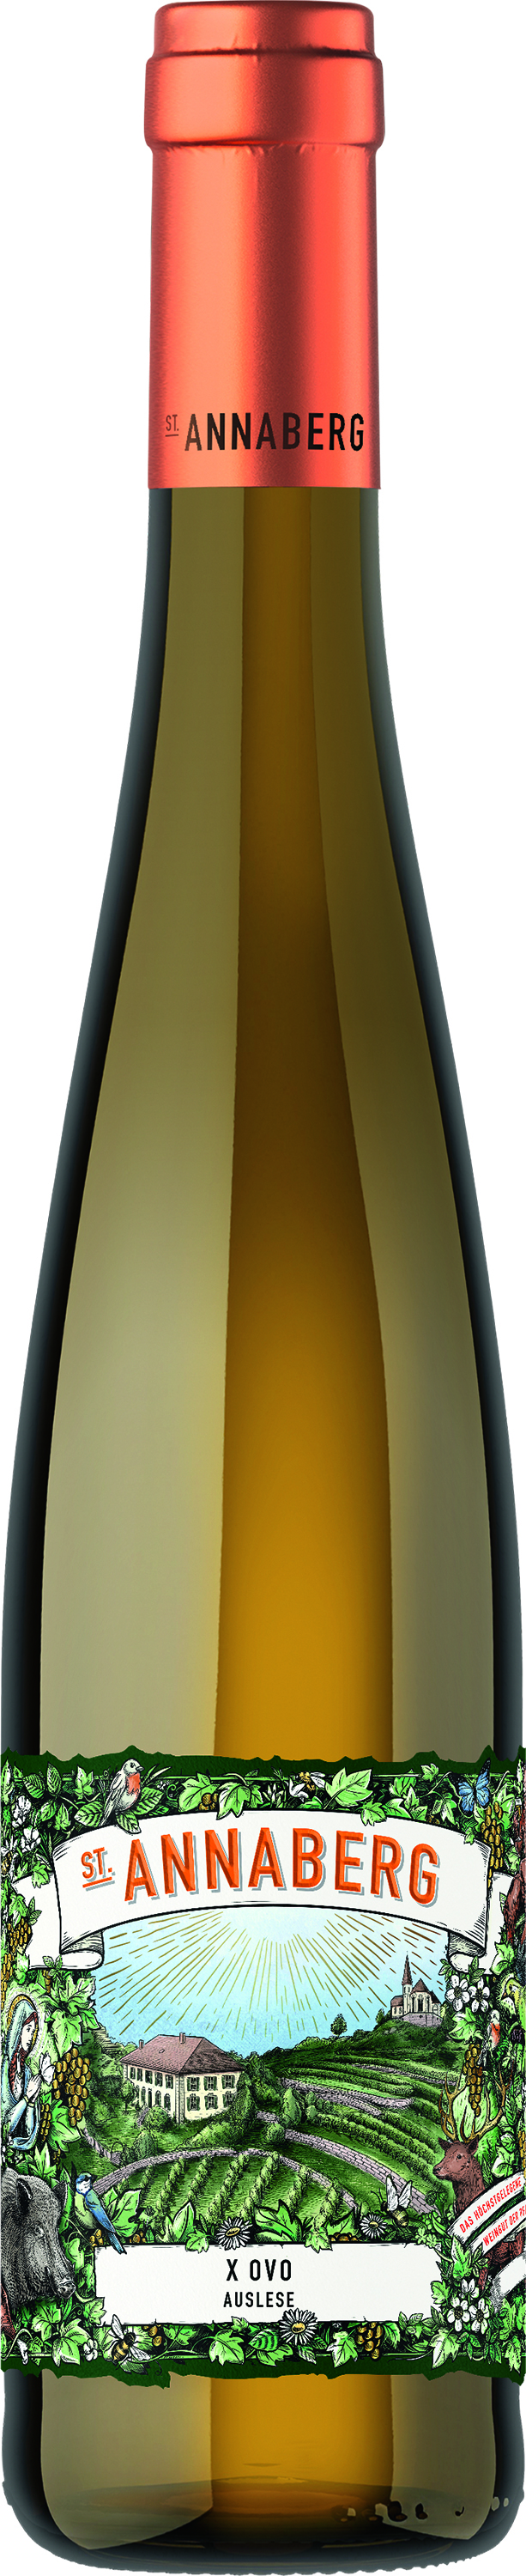 X Ovo Riesling Auslese